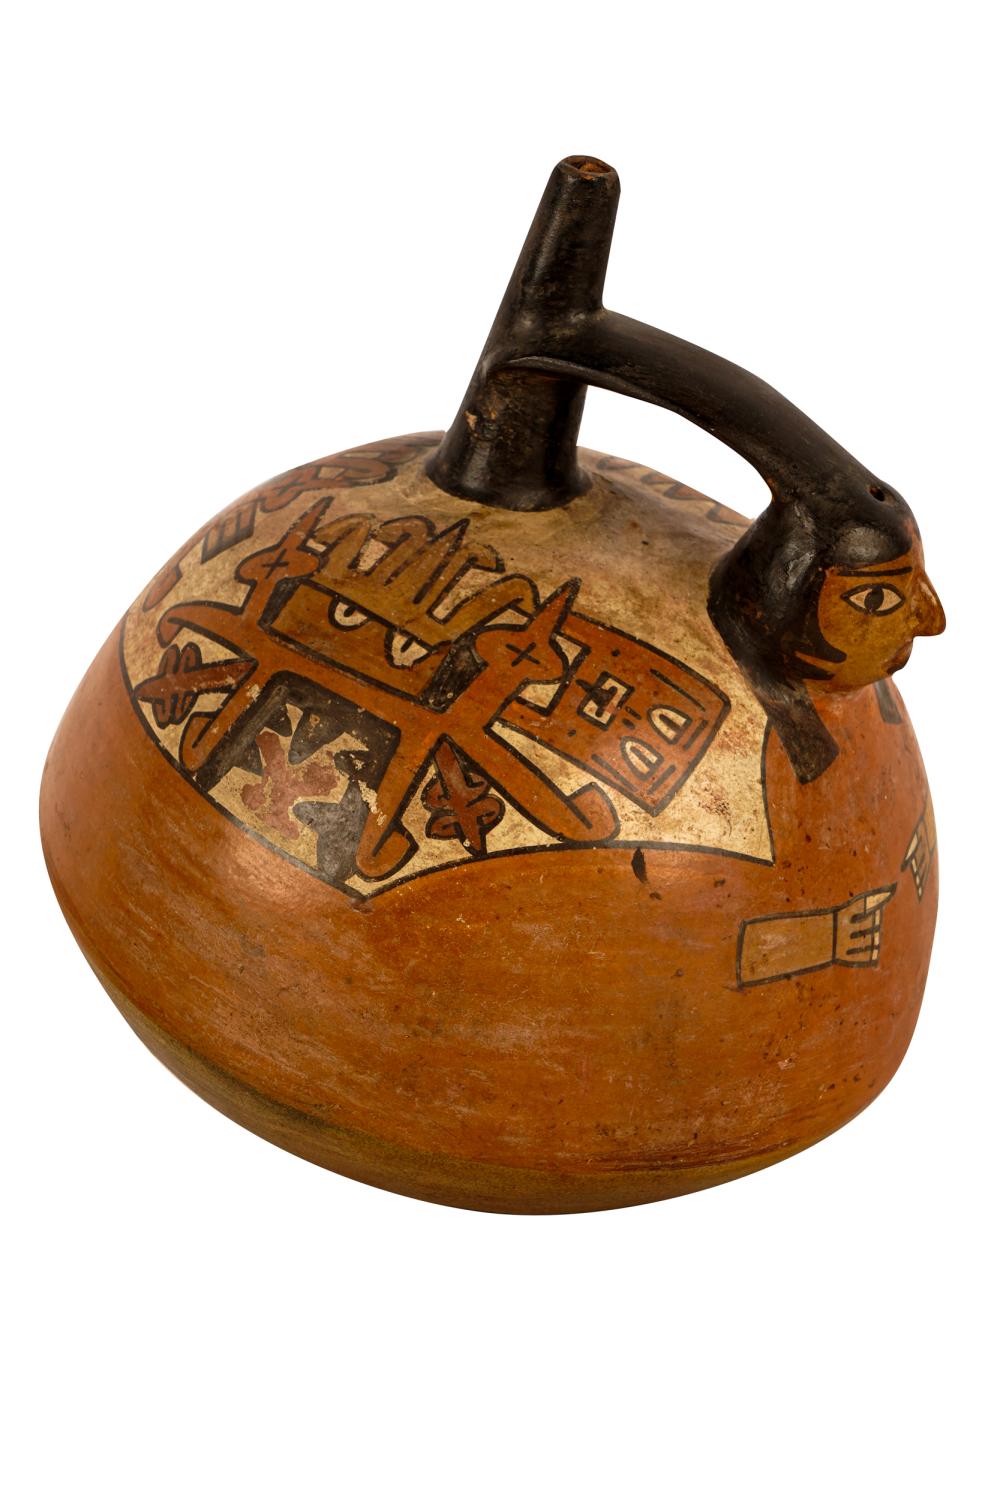 COLIMA STYLE PAINTED POTwith a 332828